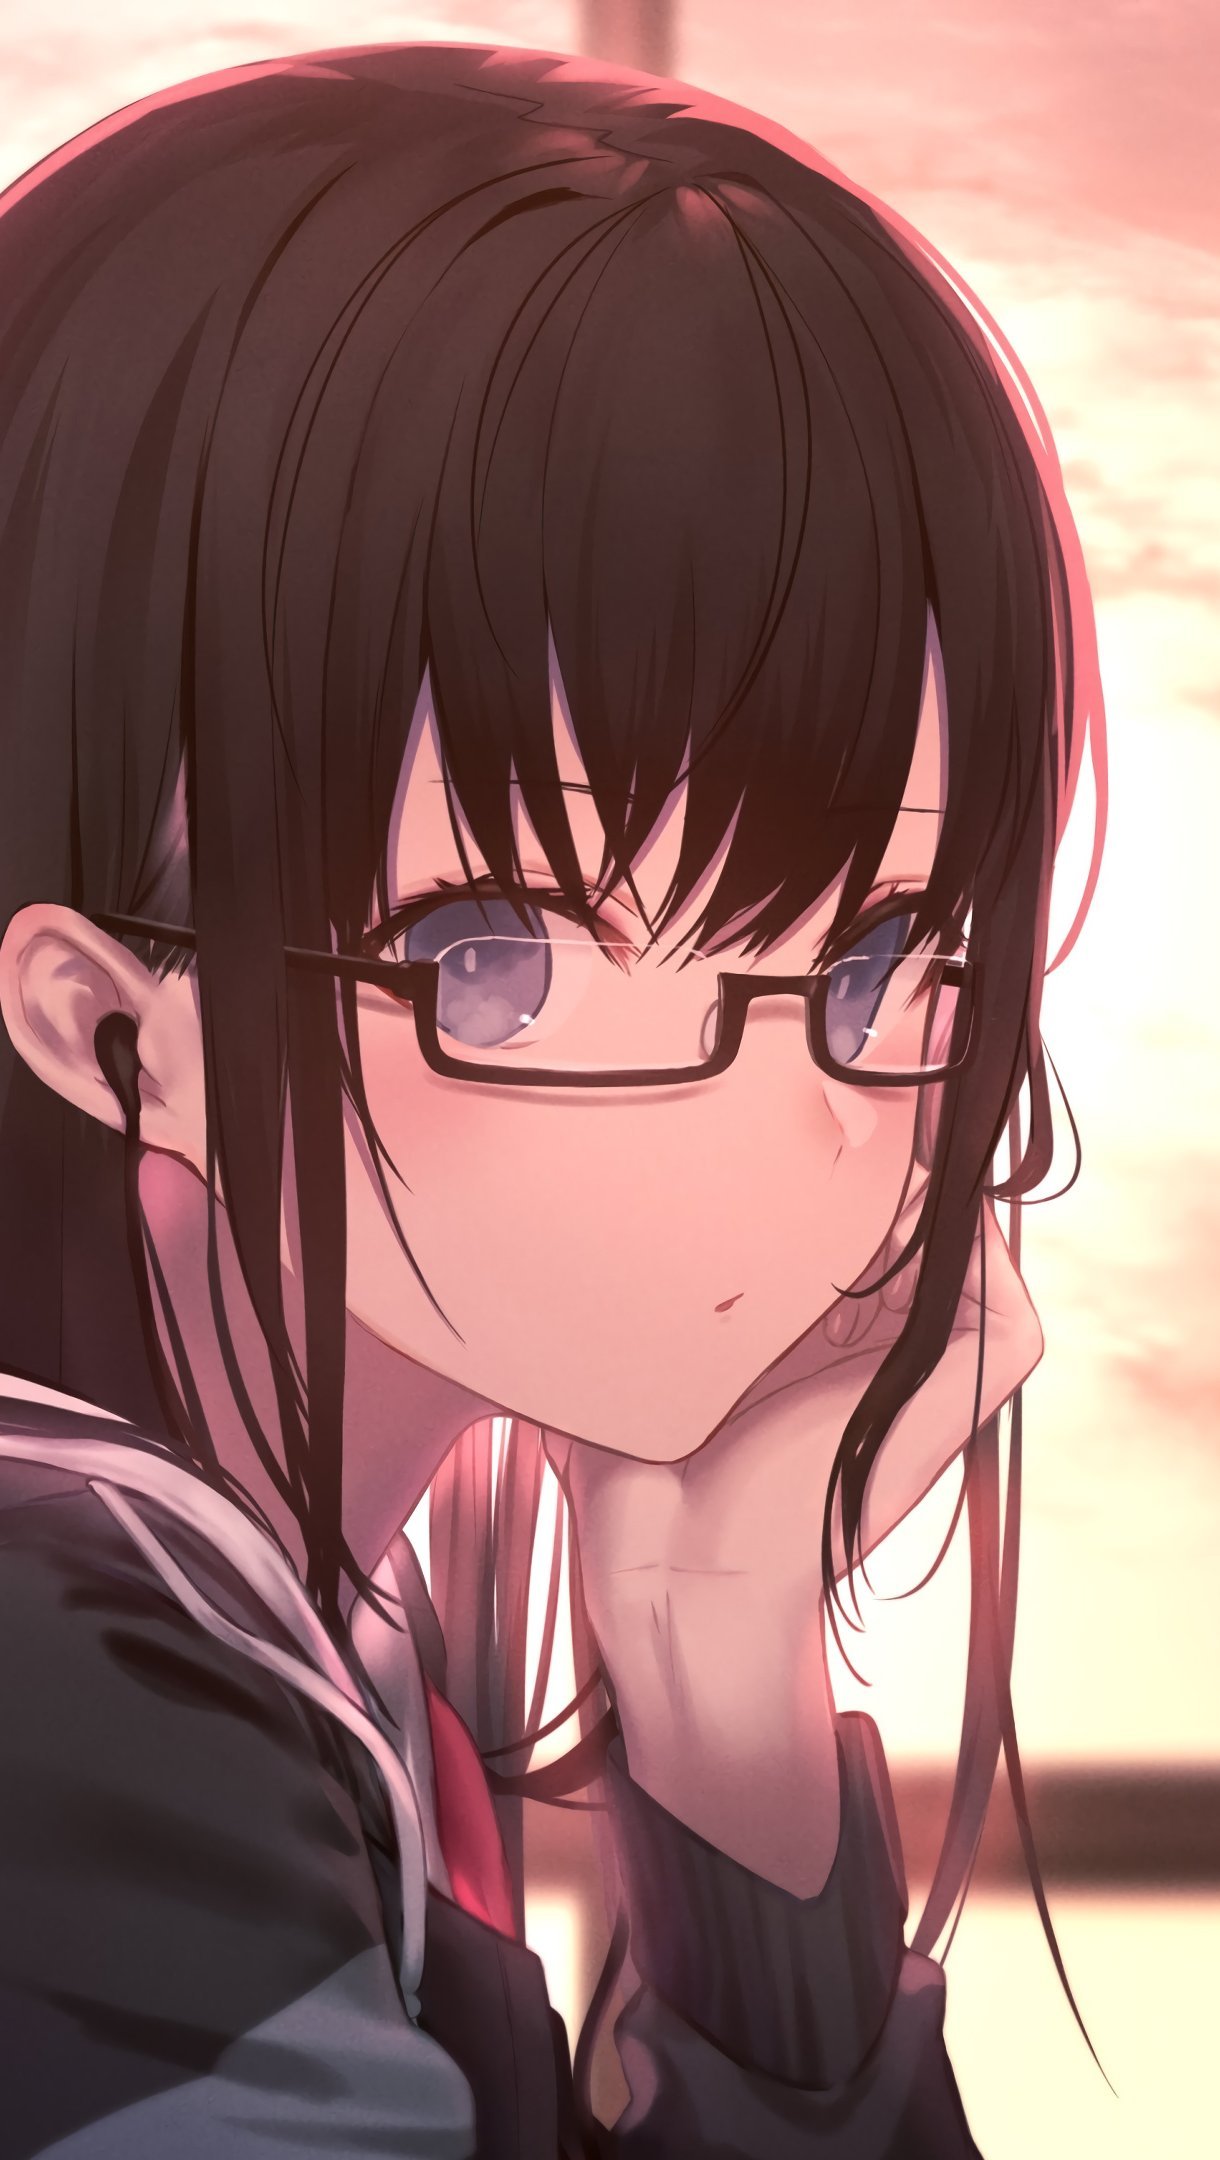 Wallpaper Anime Girl in Glasses with Student Uniform Vertical